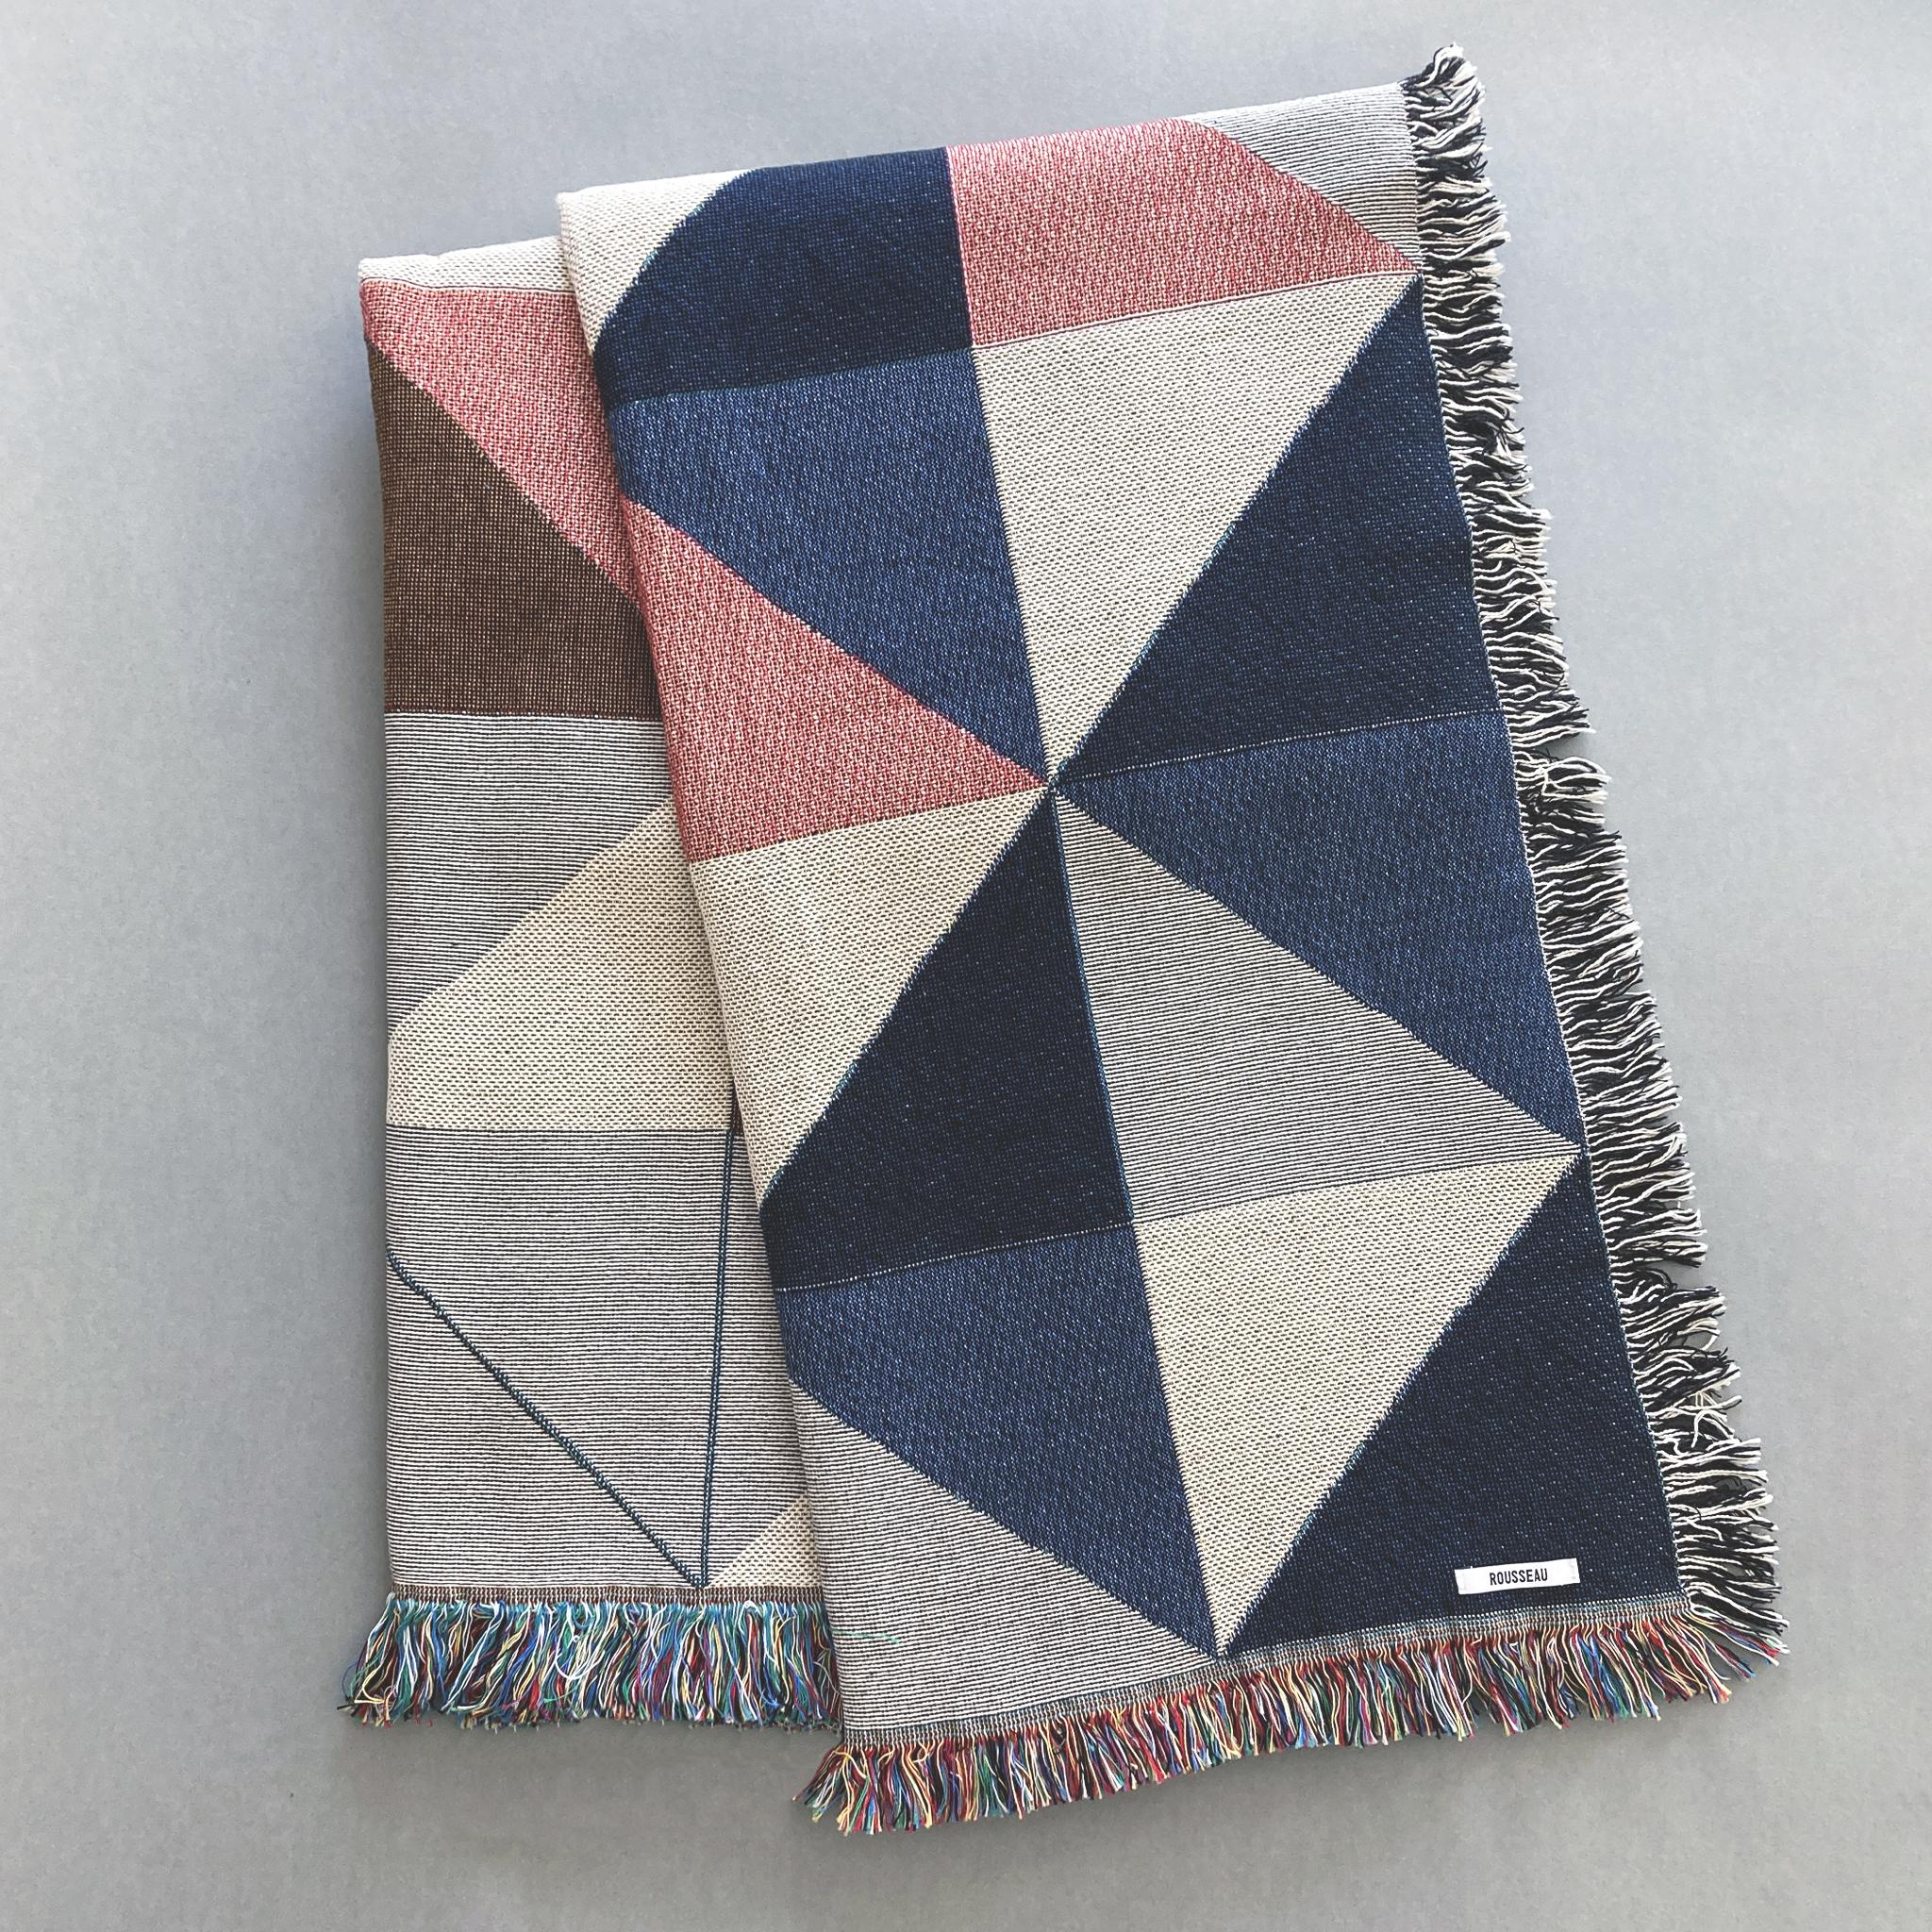 The Sixteen Geo throw, petite size, perfect for toddlers or kids. Gray, pink, ochre and navy geometric print woven throw with fringe edge. Woven with recycled cotton on a jacquard loom, made in the US. Each throw measures 40 x 54 inches.

This